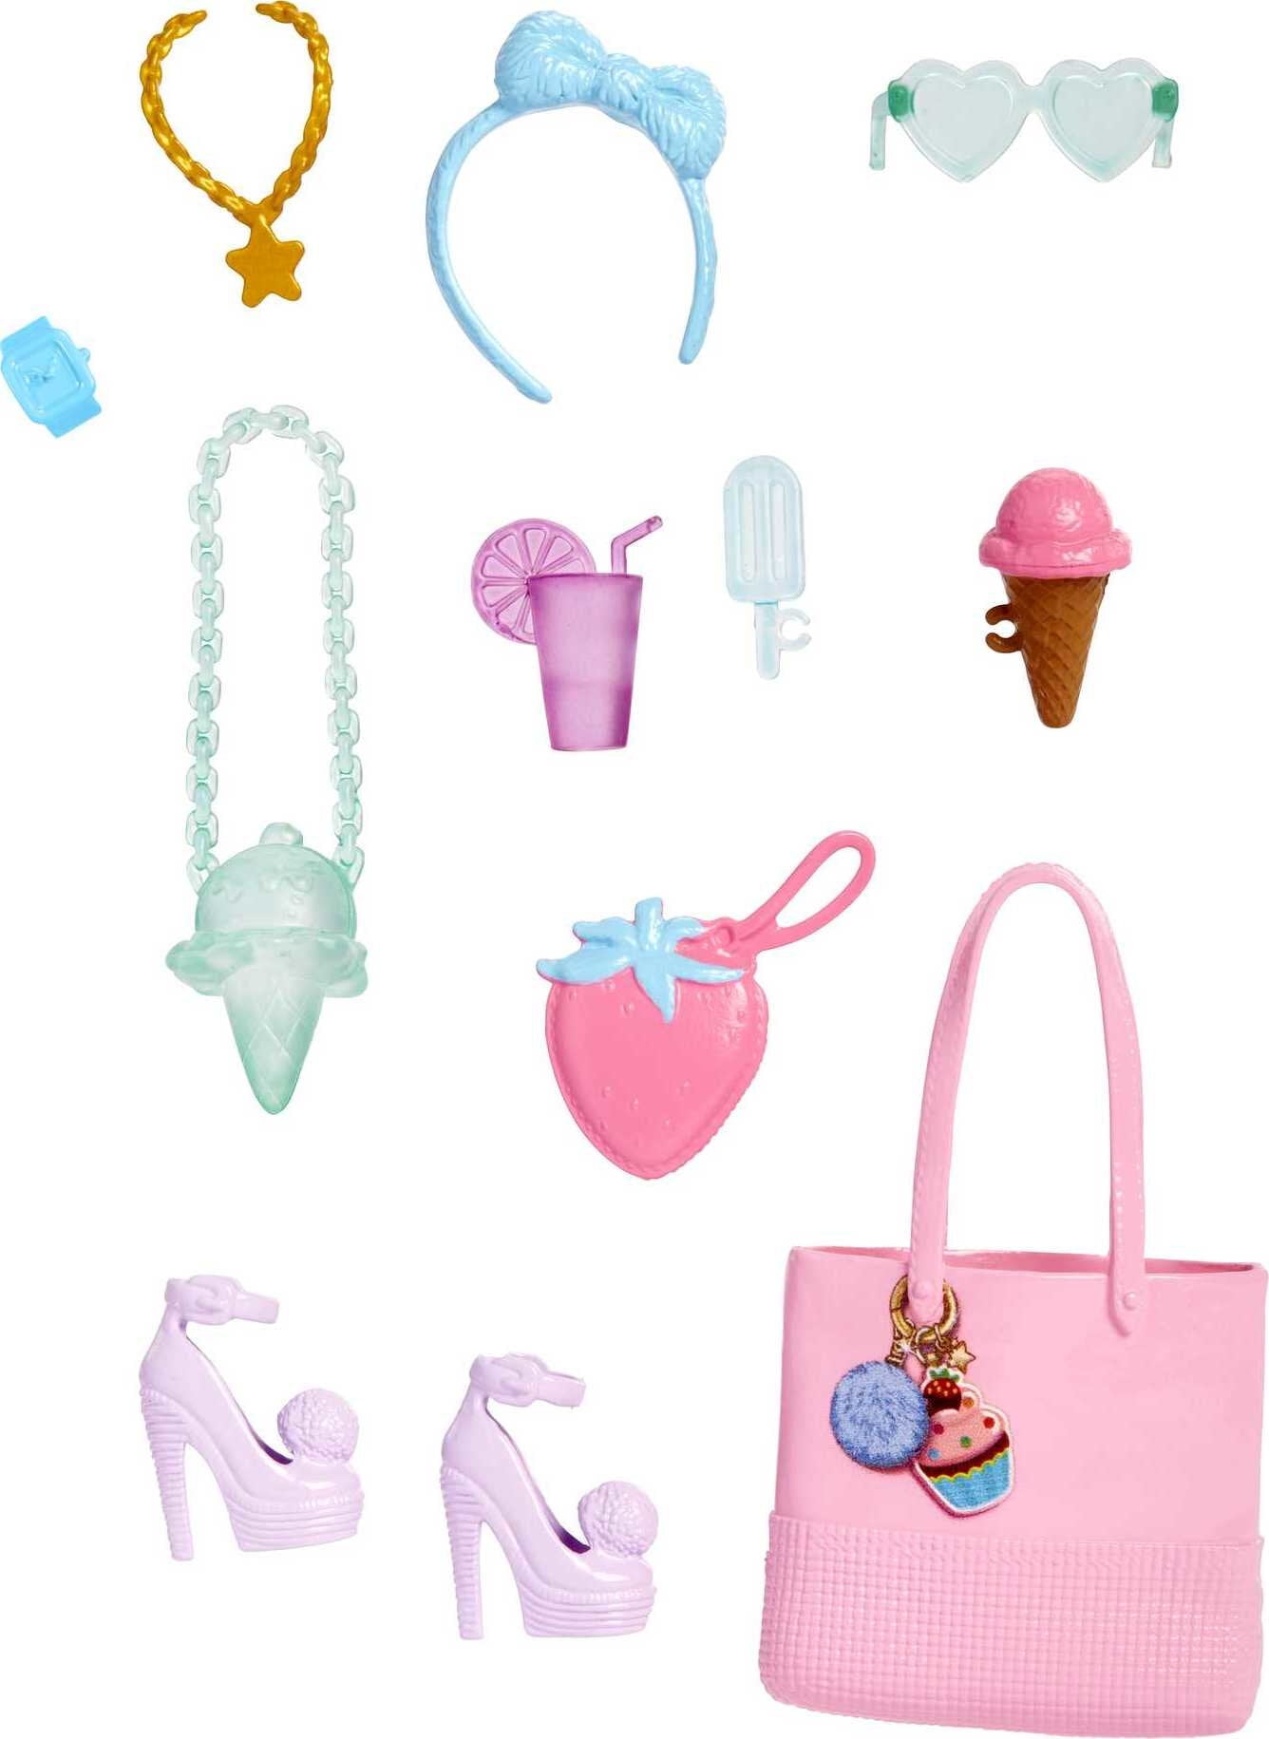 barbie accessory pack Bulan 4 Barbie Doll Accessory Pack,  Dessert and Candy-Themed Storytelling  Fashion Pieces